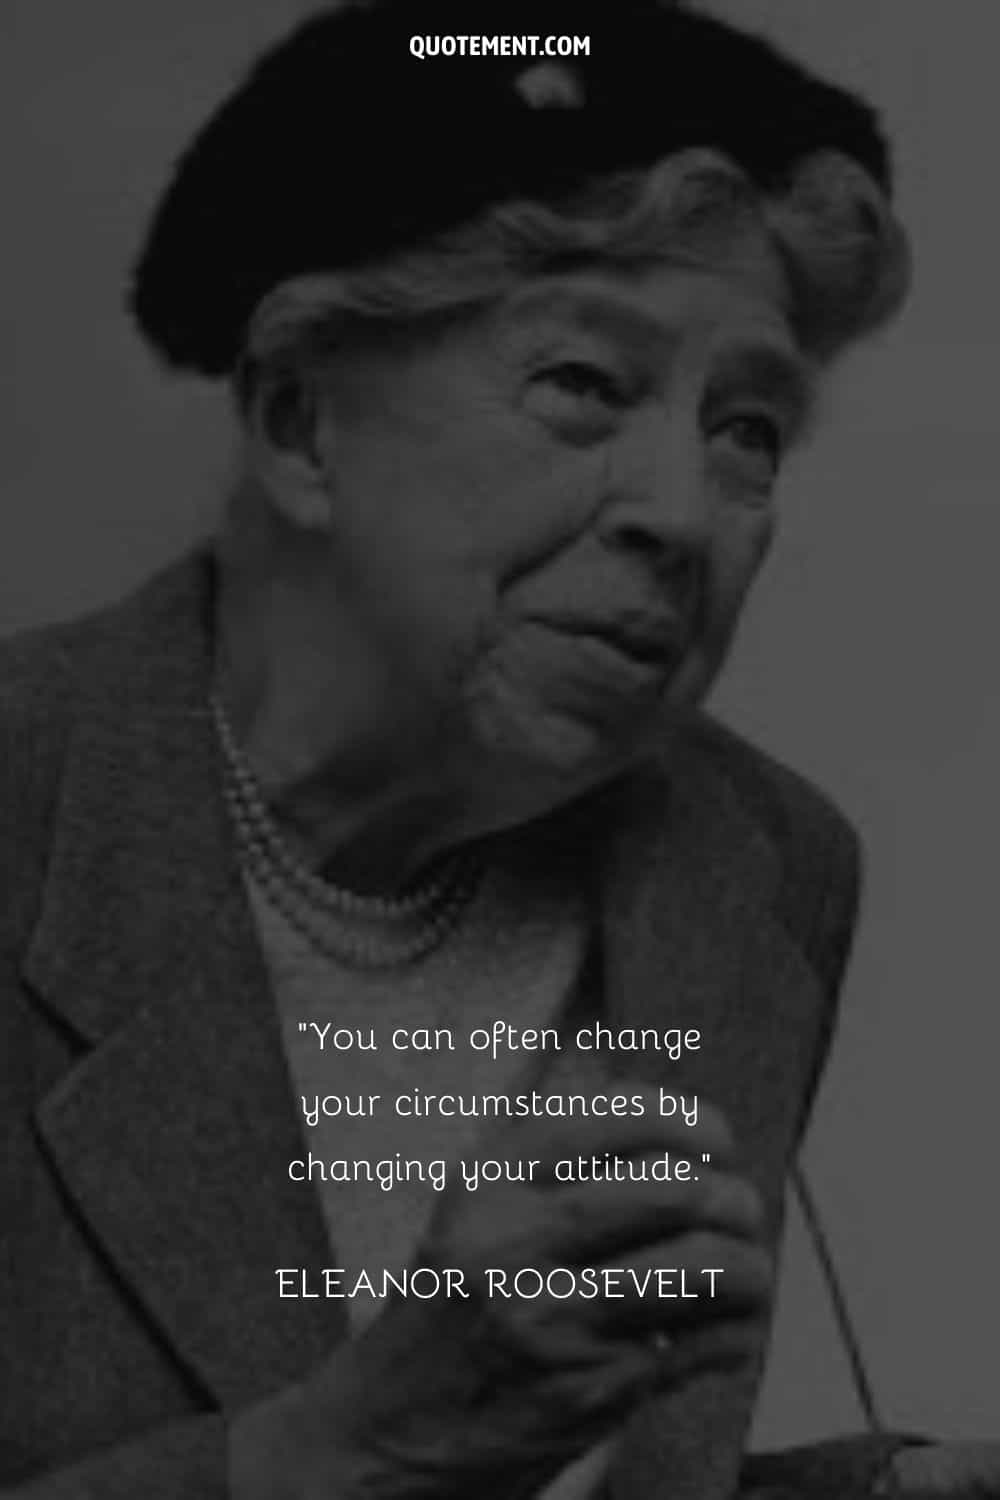 “You can often change your circumstances by changing your attitude.” — Eleanor Roosevelt